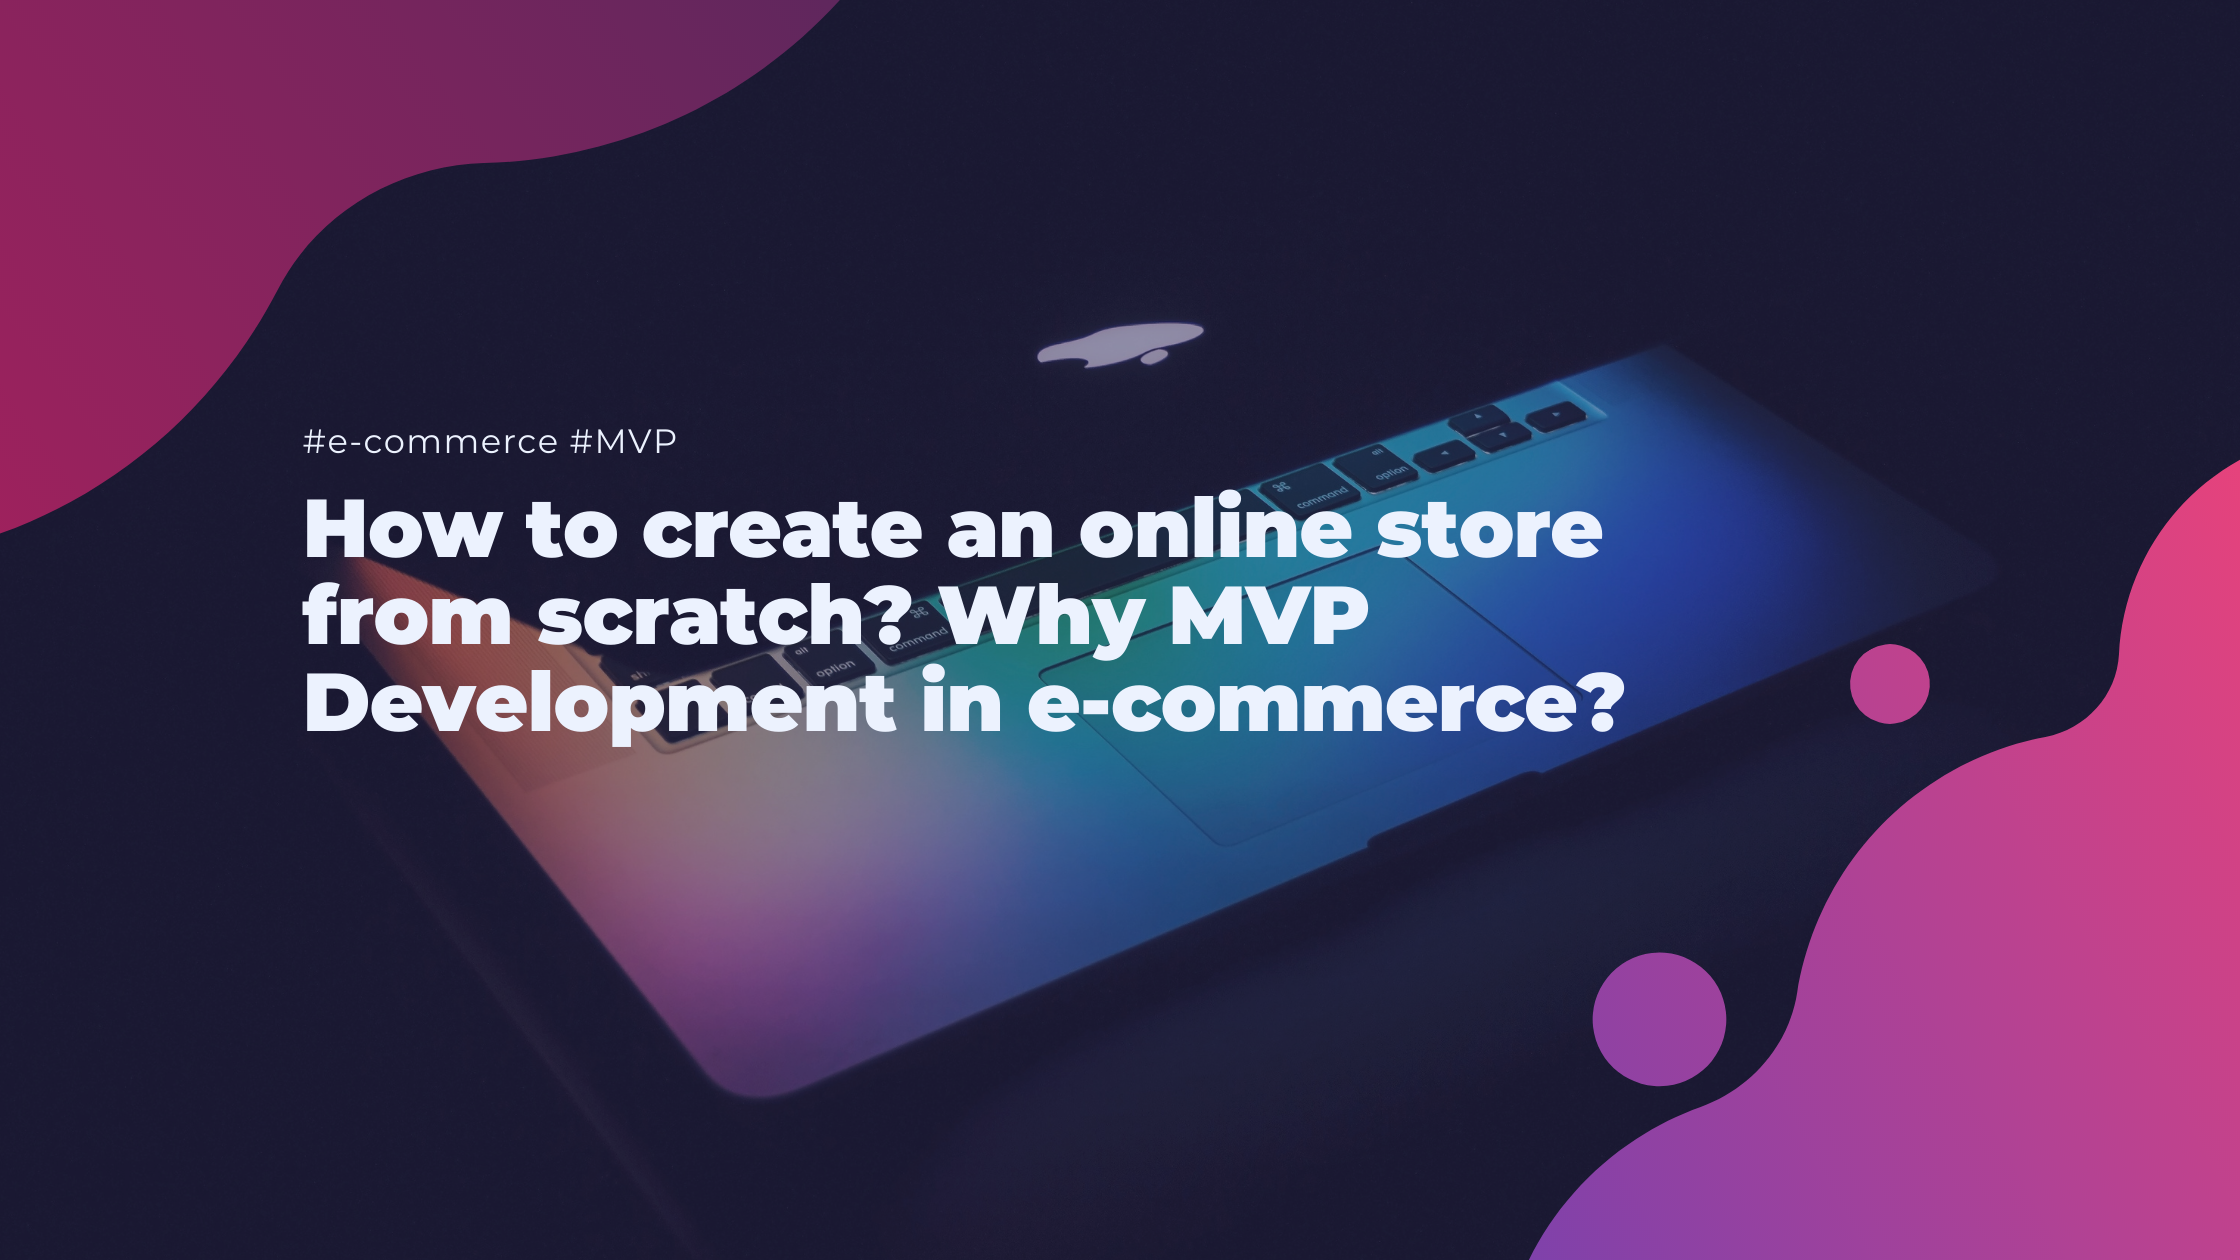 How to create an online store from scratch? Why MVP Development in e-commerce?